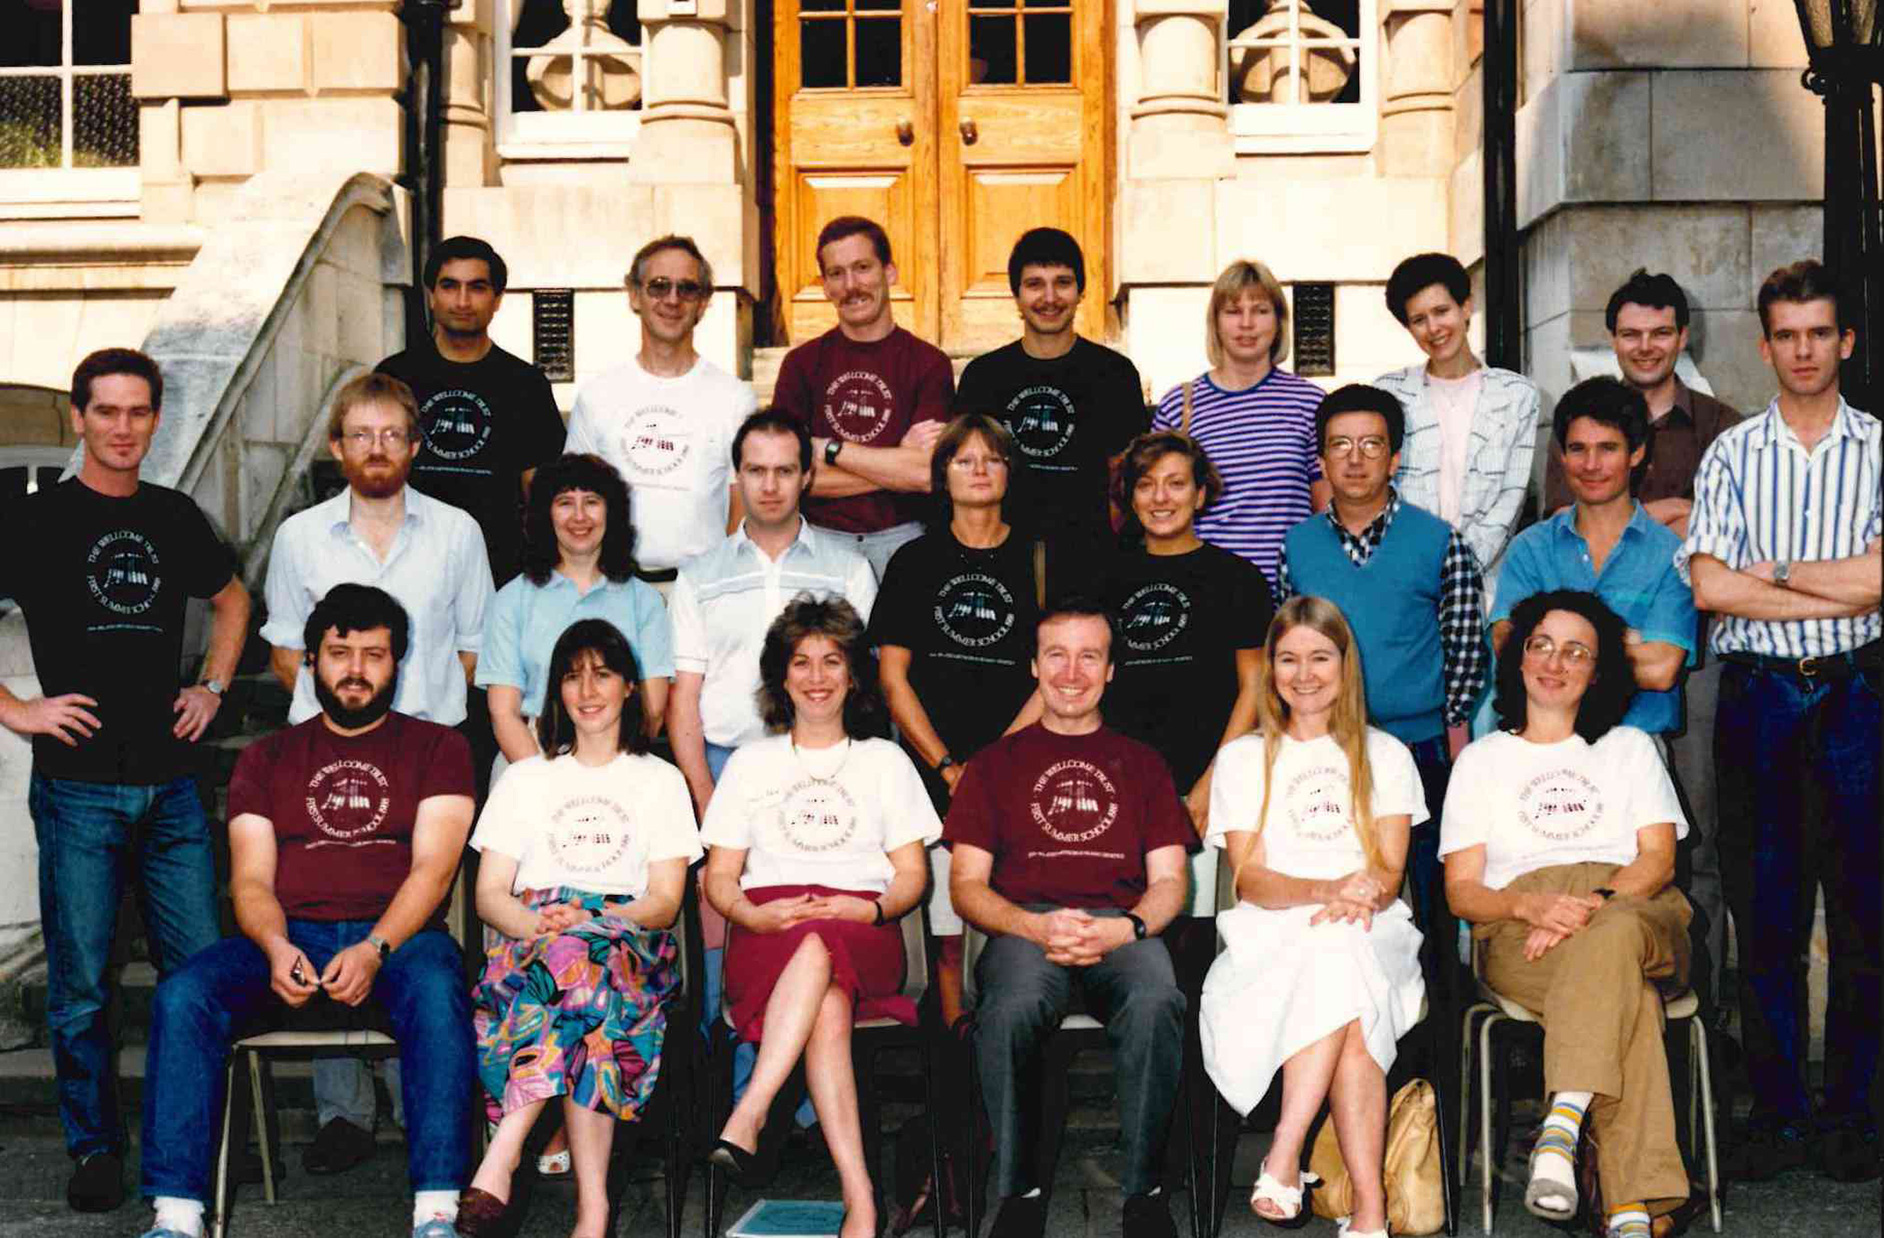 First ever Wellcome Genome Campus Advanced Course participants in 1988